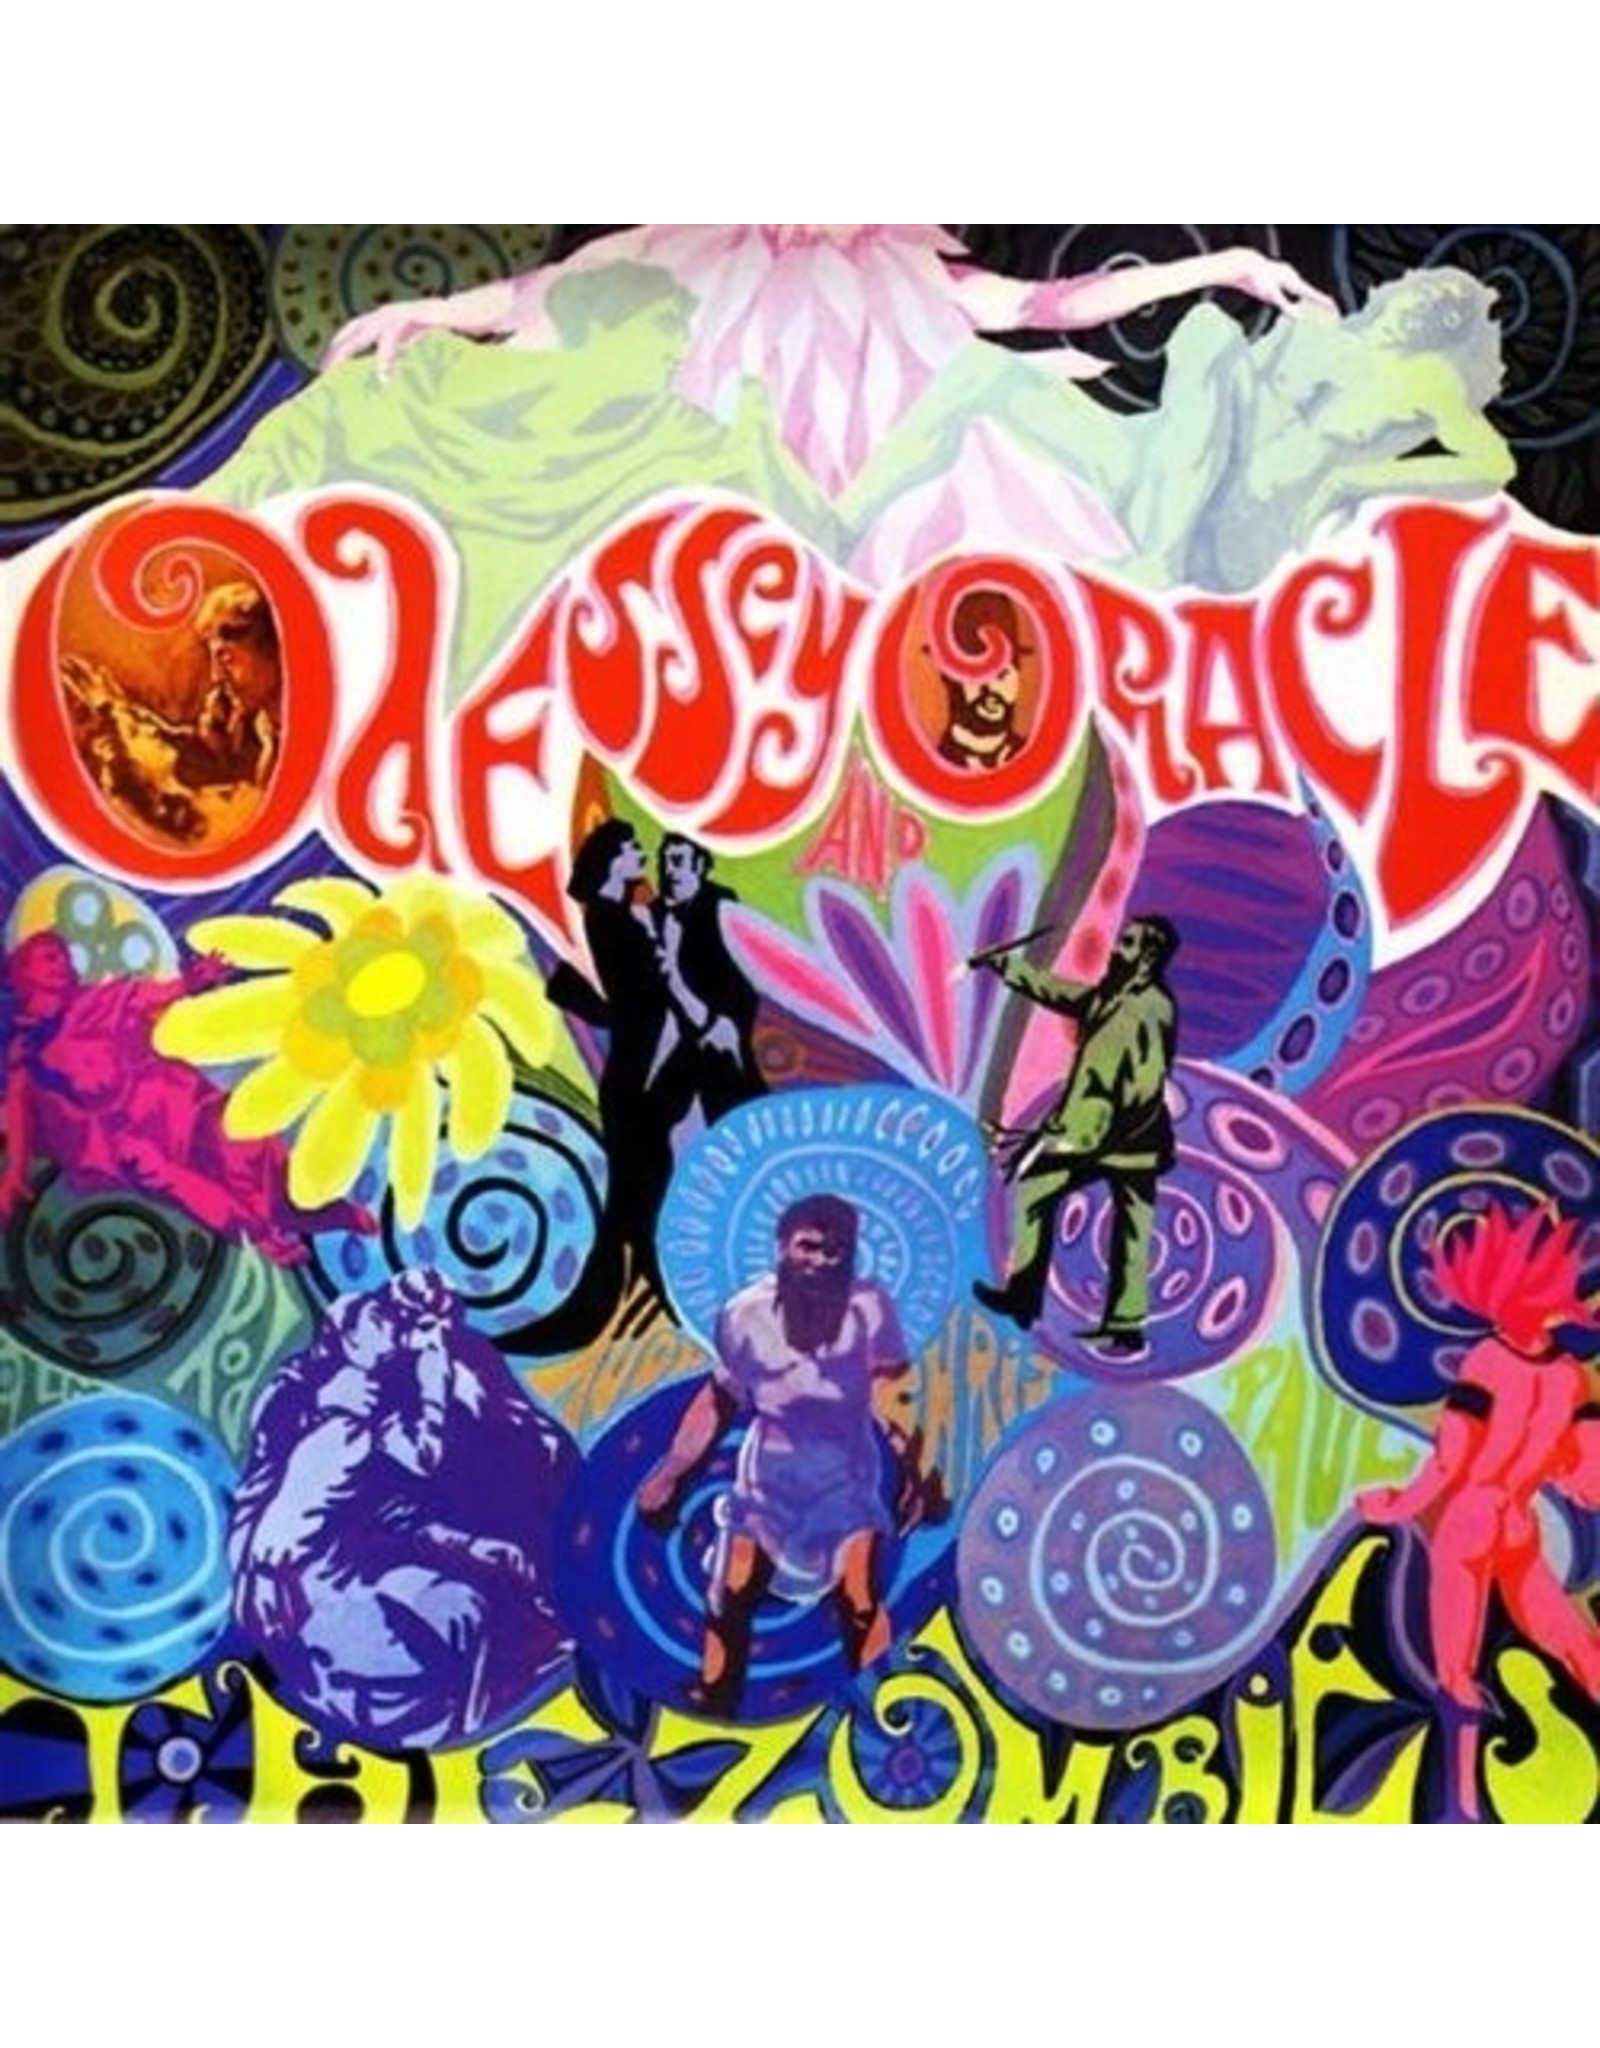 New Vinyl The Zombies - Odessey And Oracle LP